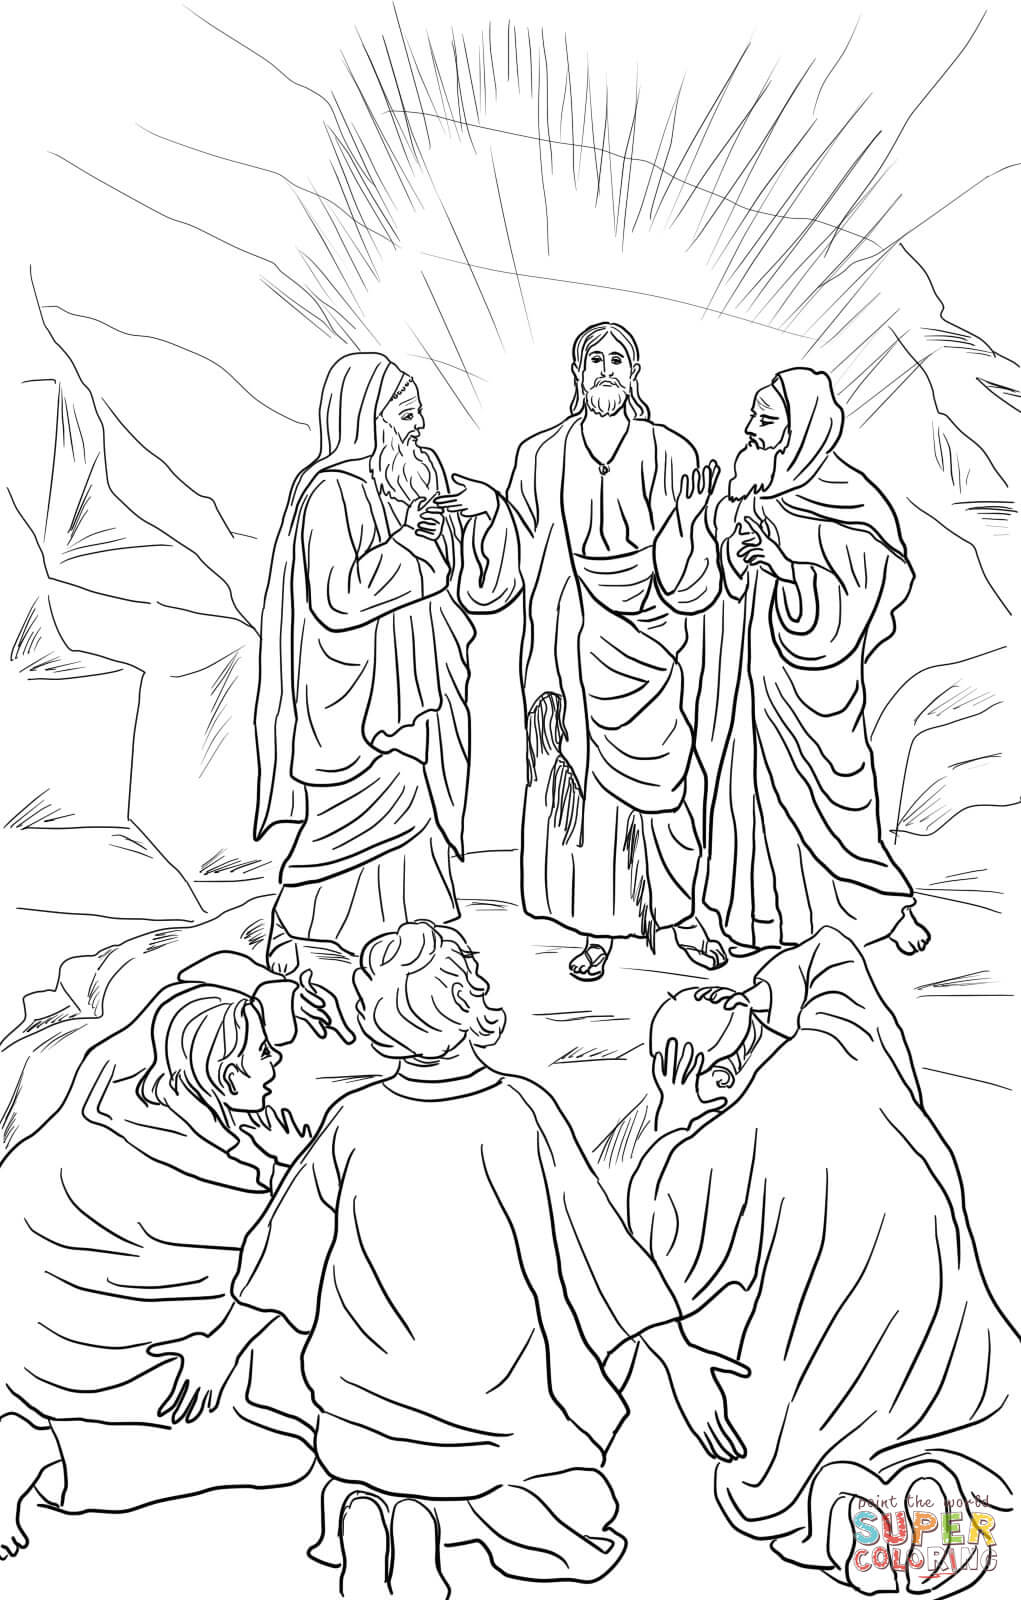 Download Jesus Transfiguration Coloring Page Free Printable Coloring Pages Coloring Home